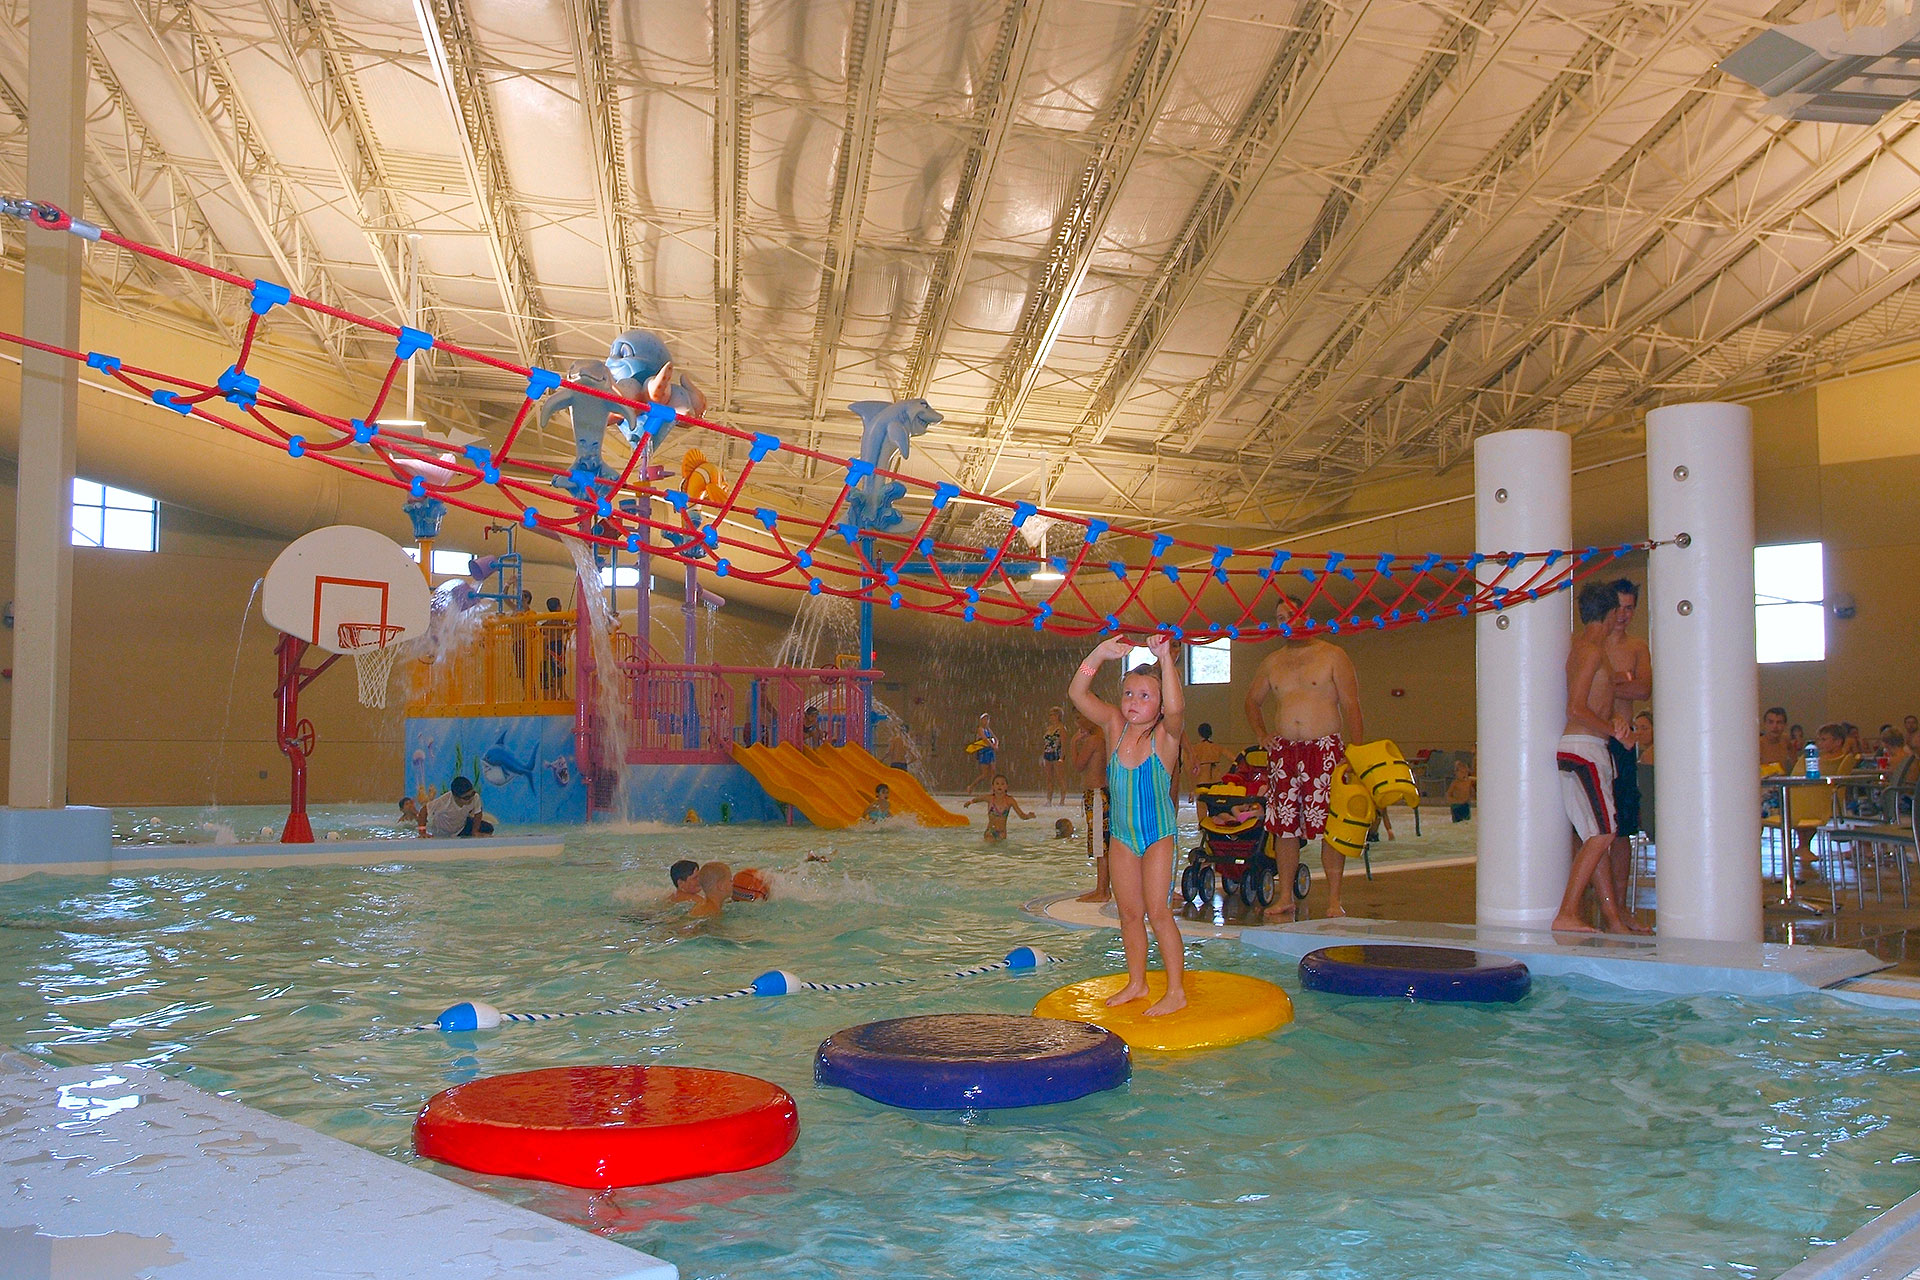 12 KidFriendly Hotels with Indoor Water Parks in the US 